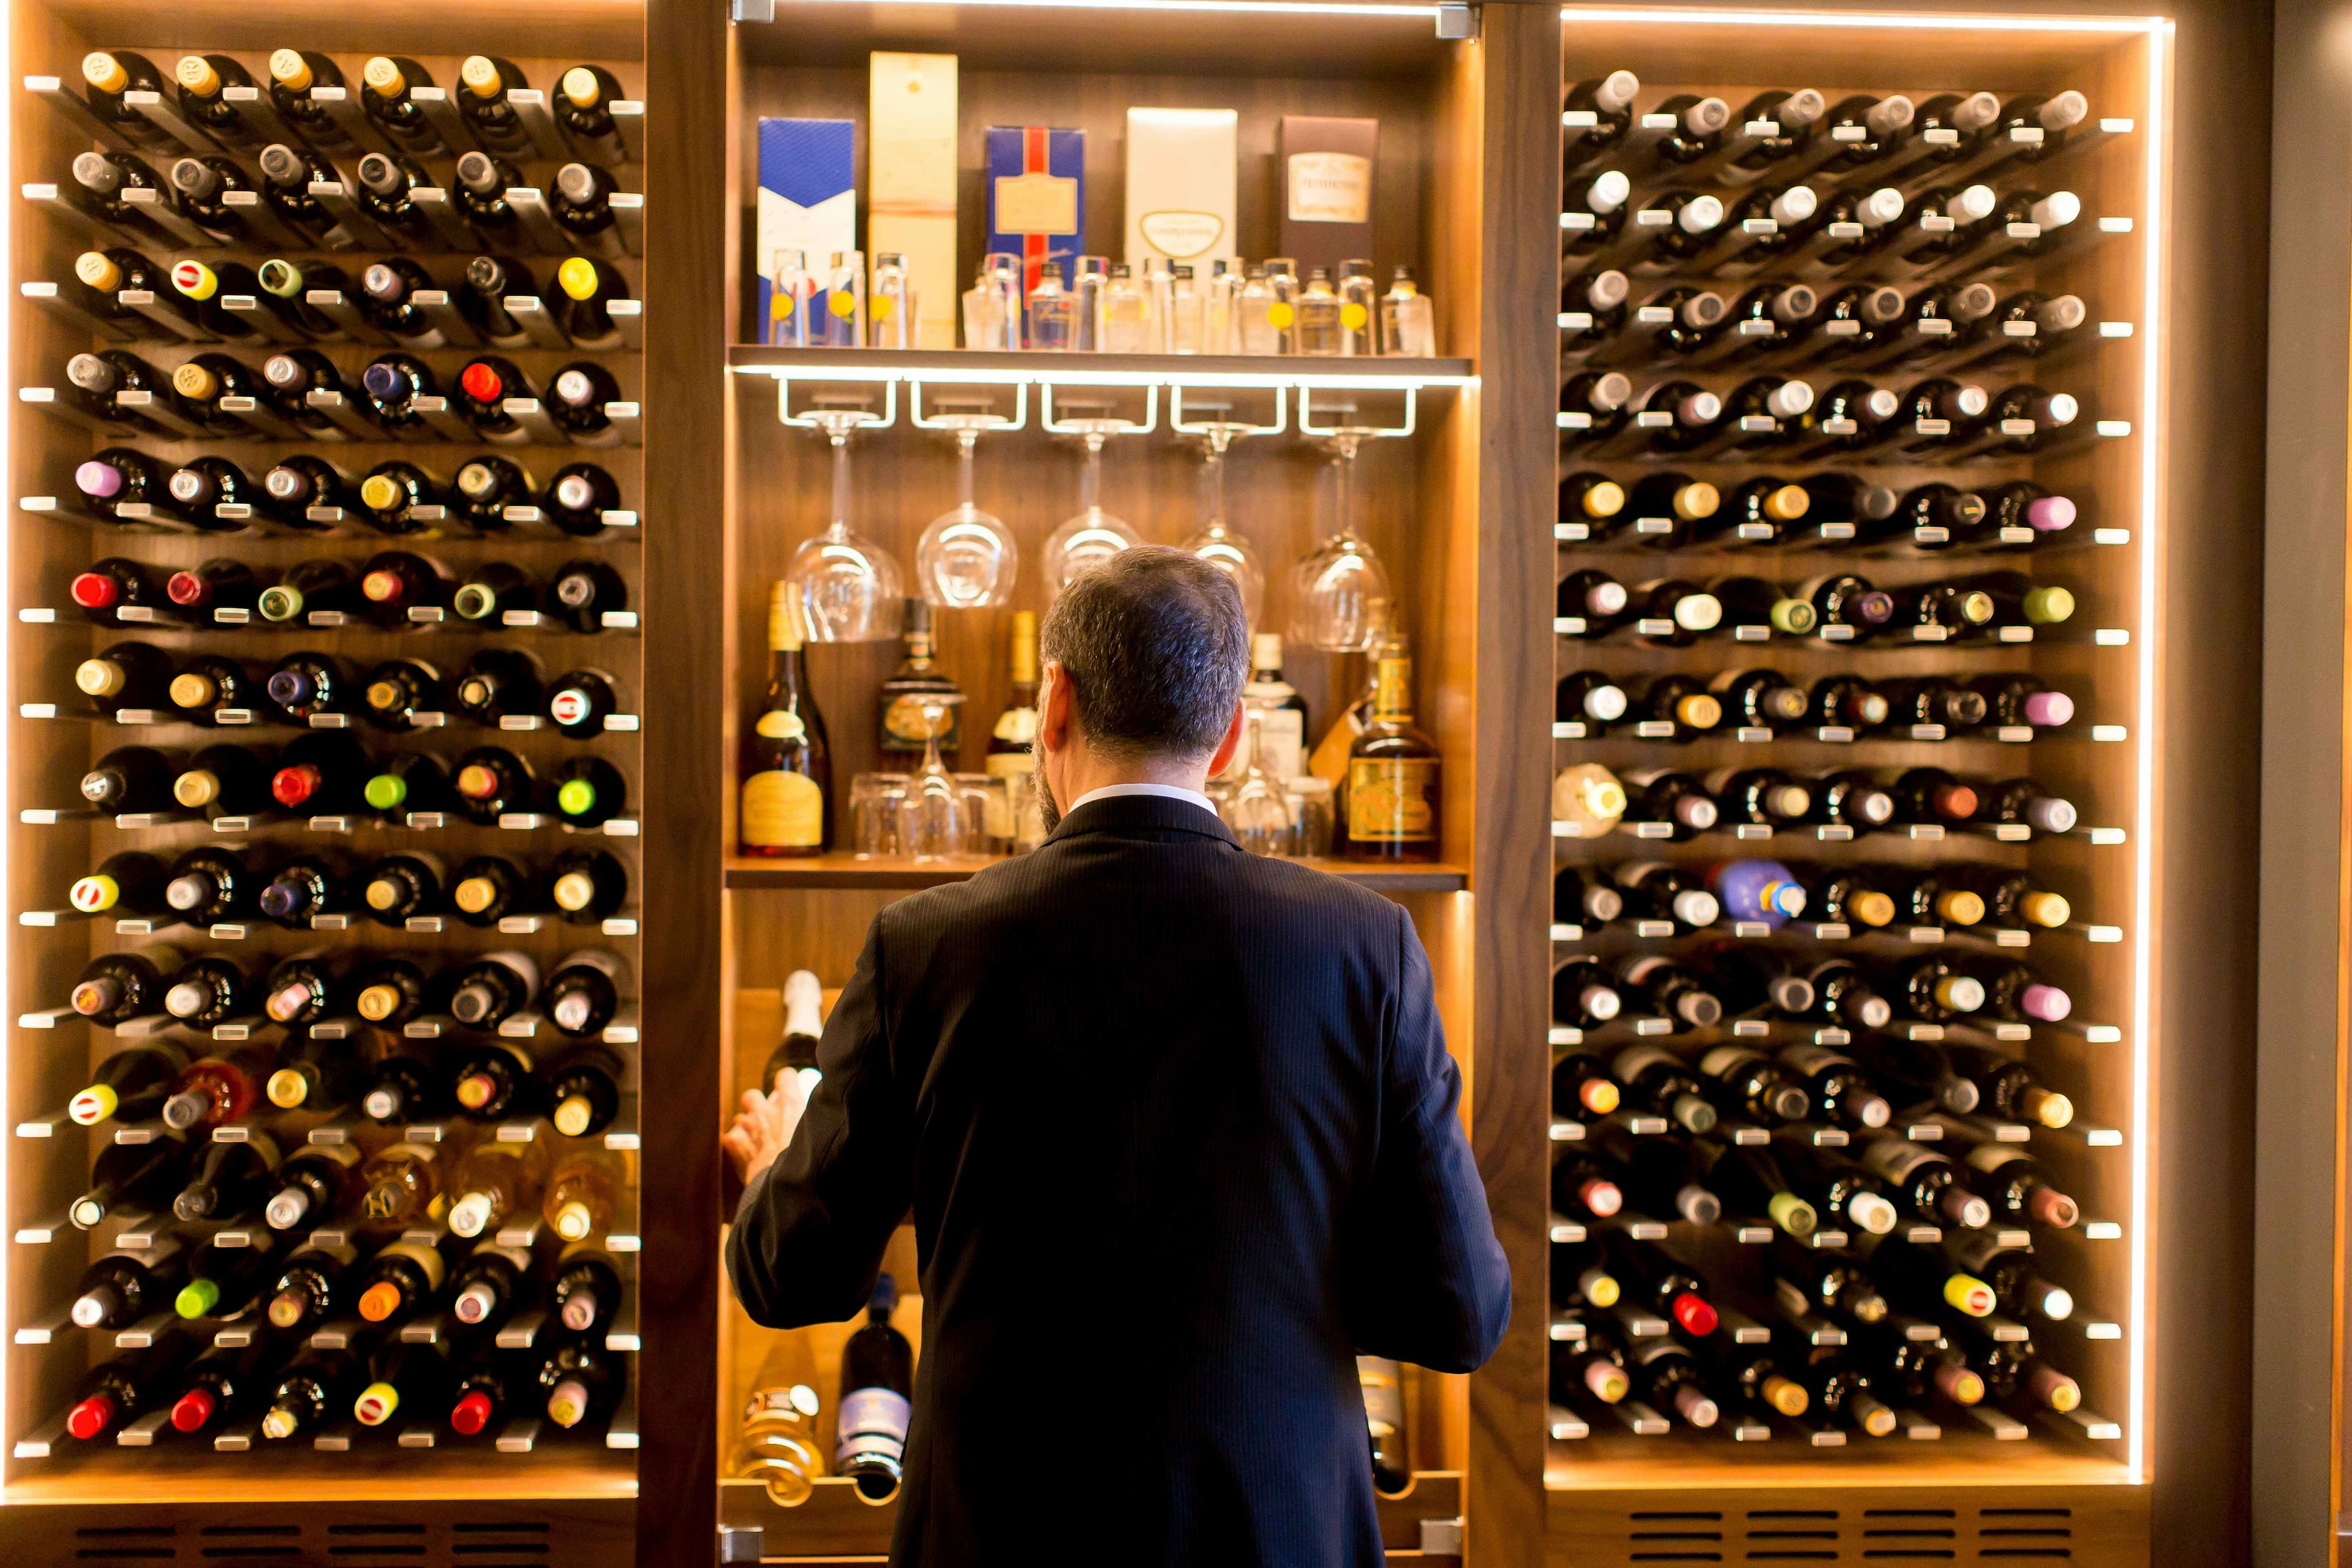 Learn How To Store Whisky vs Wine: A Guide On Why The Spirits Are Kept Differently